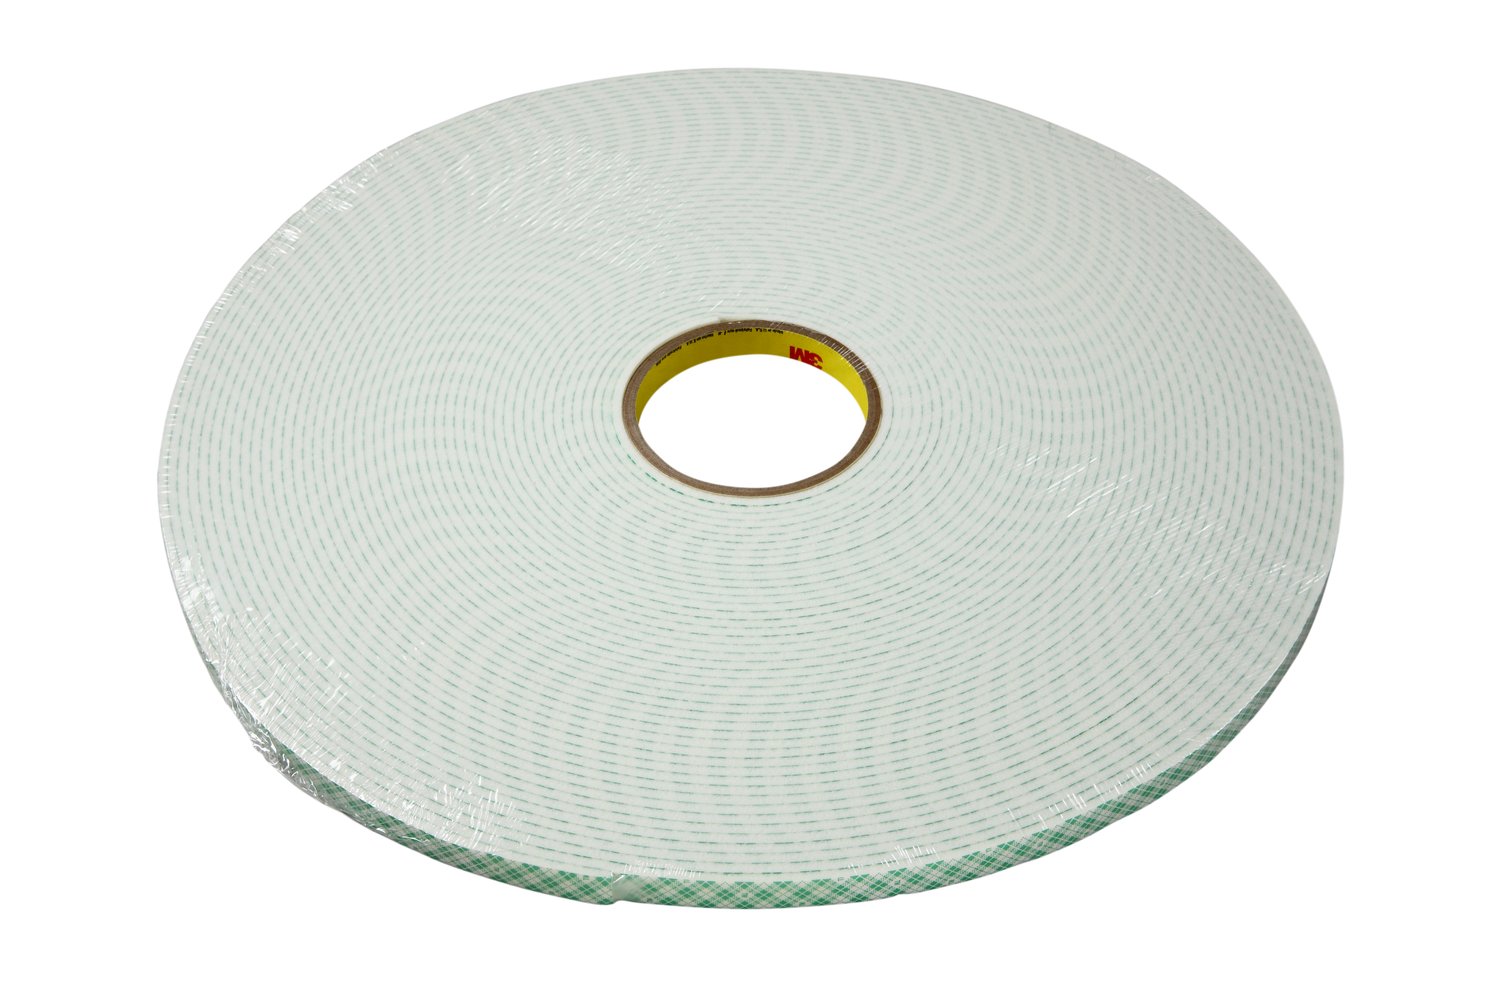 7000144639 - 3M Double Coated Urethane Foam Tape 4004, Off White, 1 in x 18 yd, 250
mil, 9 rolls per case